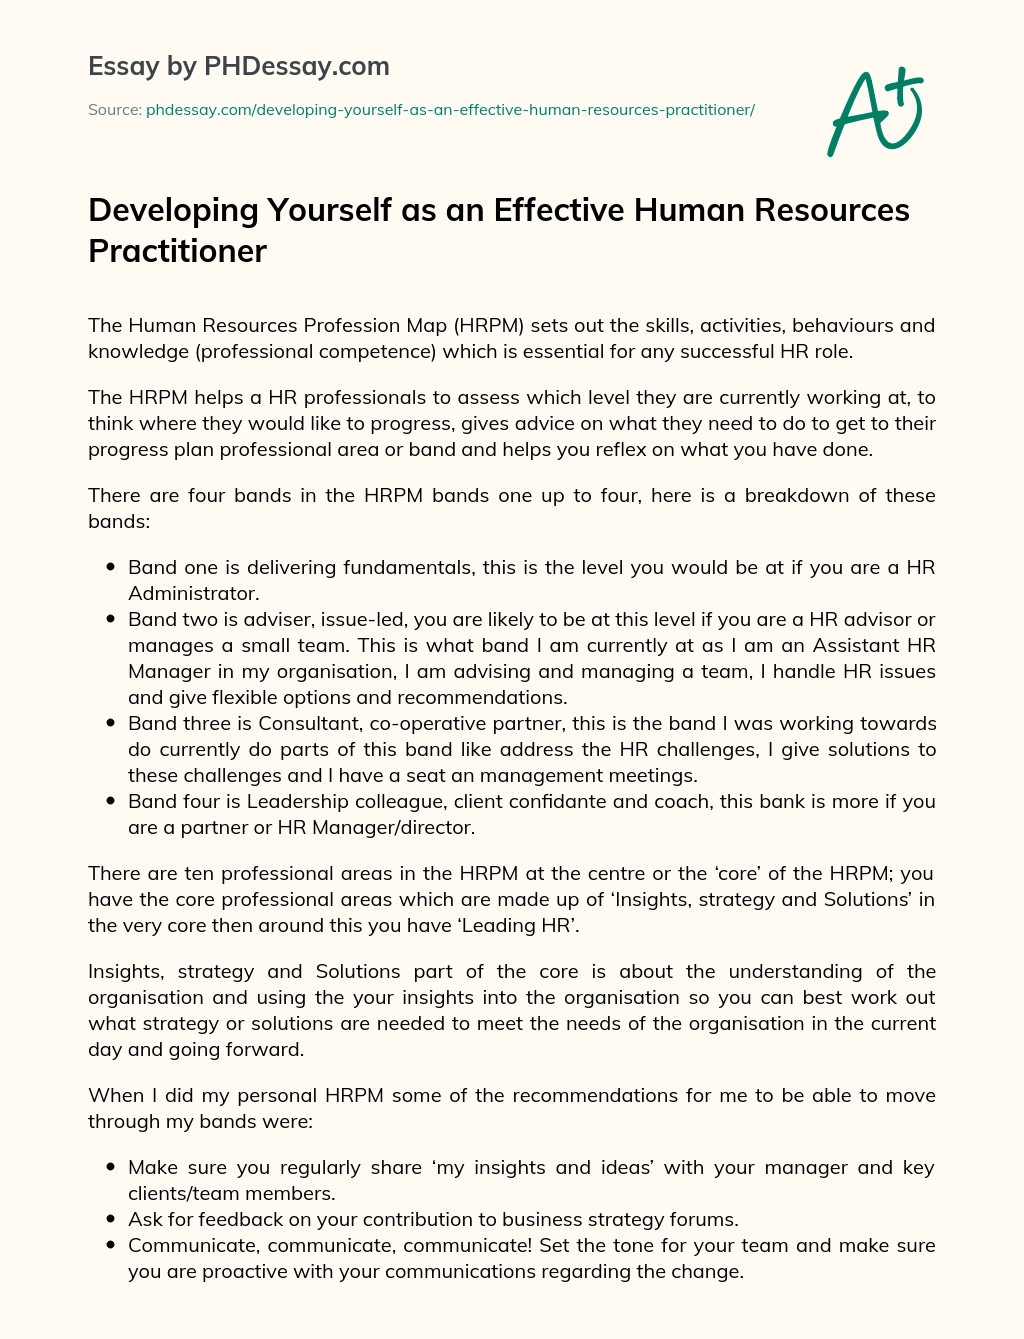 Developing Yourself as an Effective Human Resources Practitioner essay